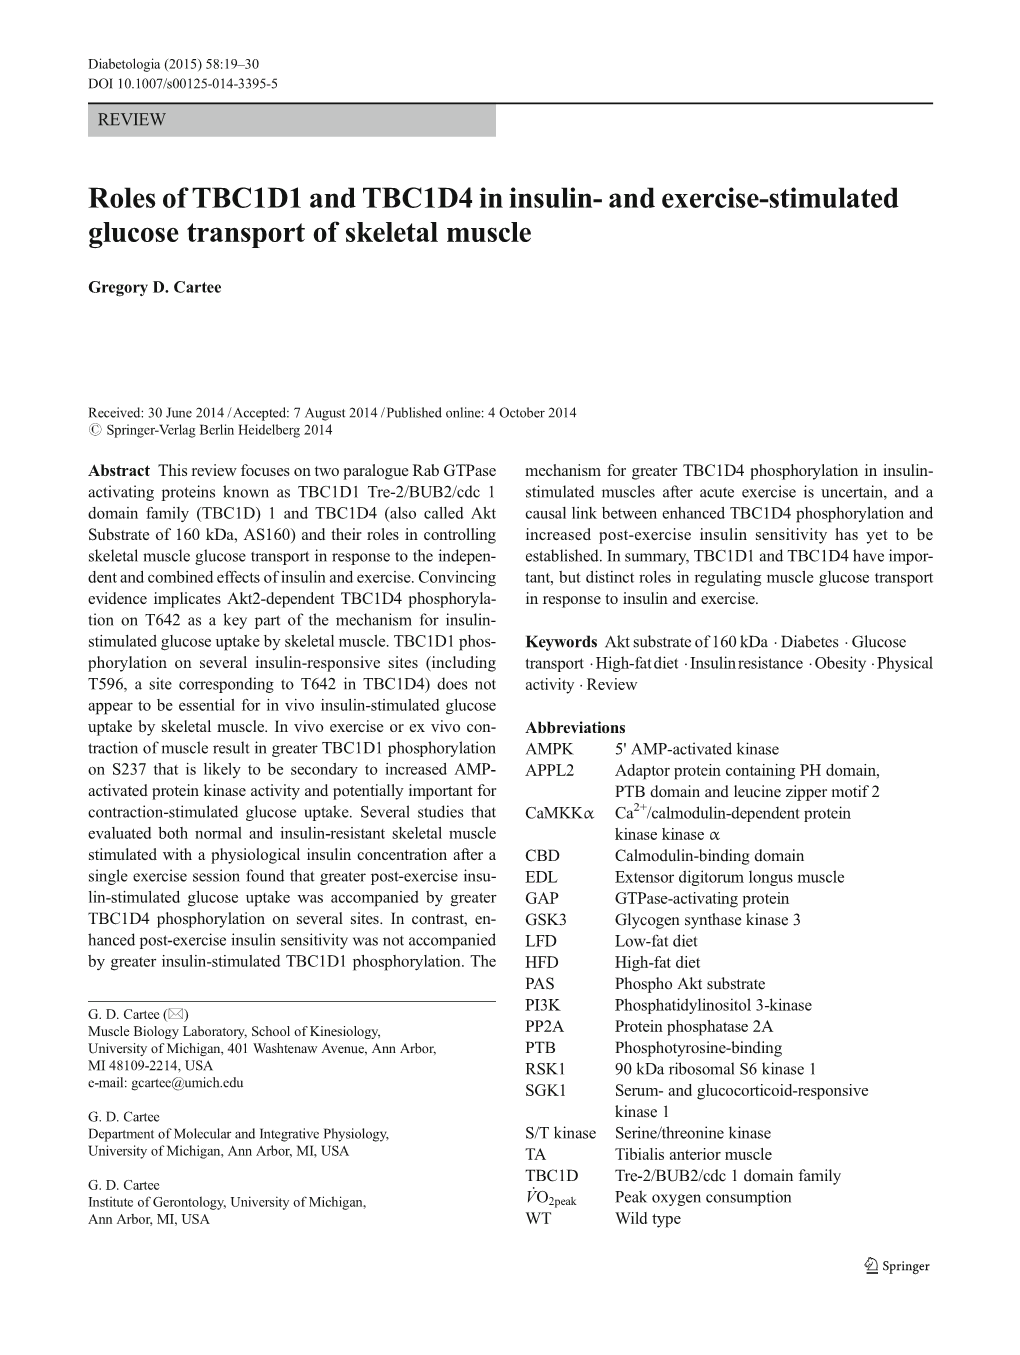 Roles of TBC1D1 and TBC1D4 in Insulin- and Exercise-Stimulated Glucose Transport of Skeletal Muscle